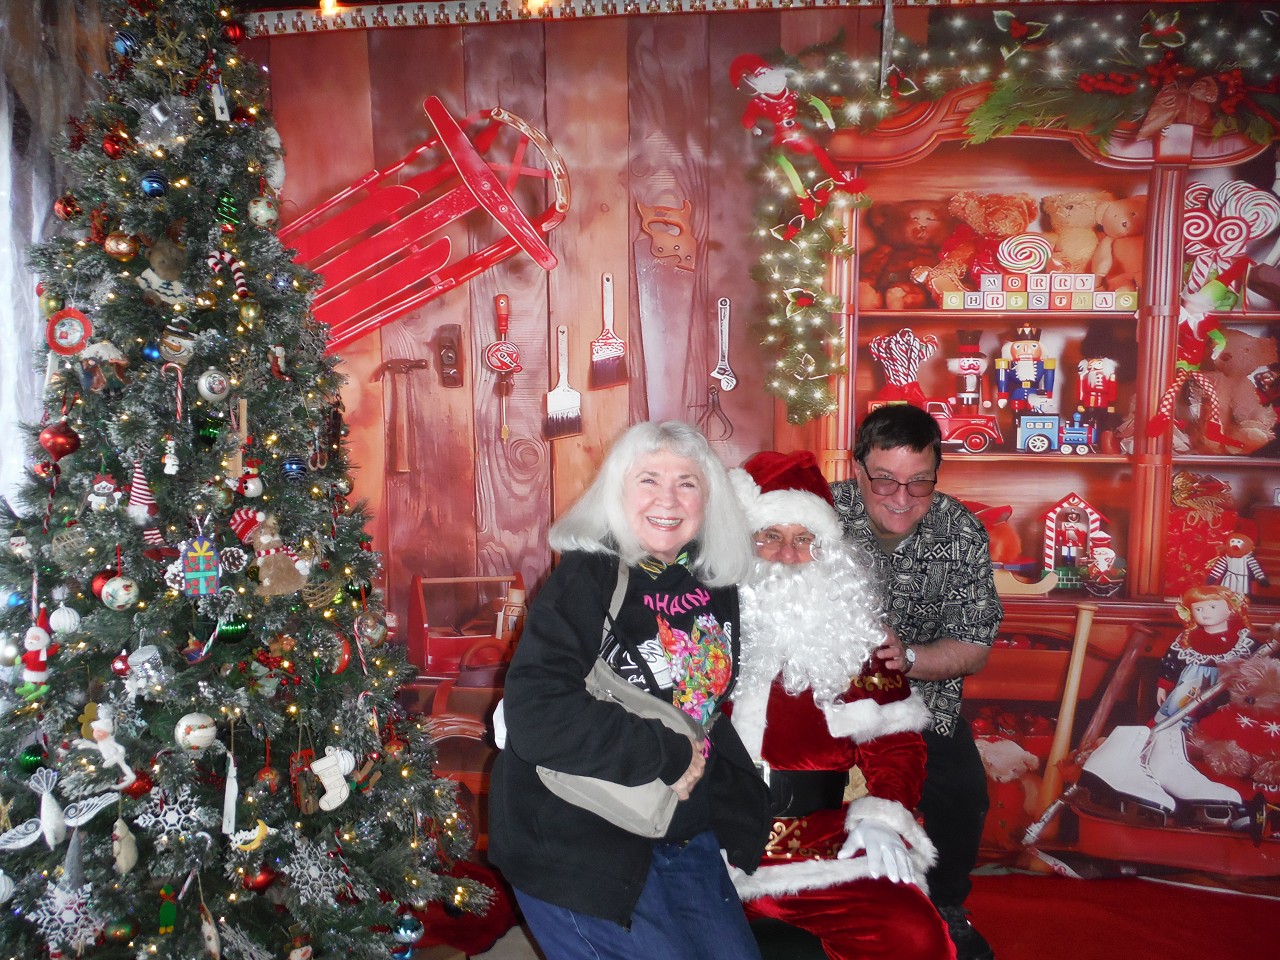 12 15 23 Christmas at the museum with santa clause (13)